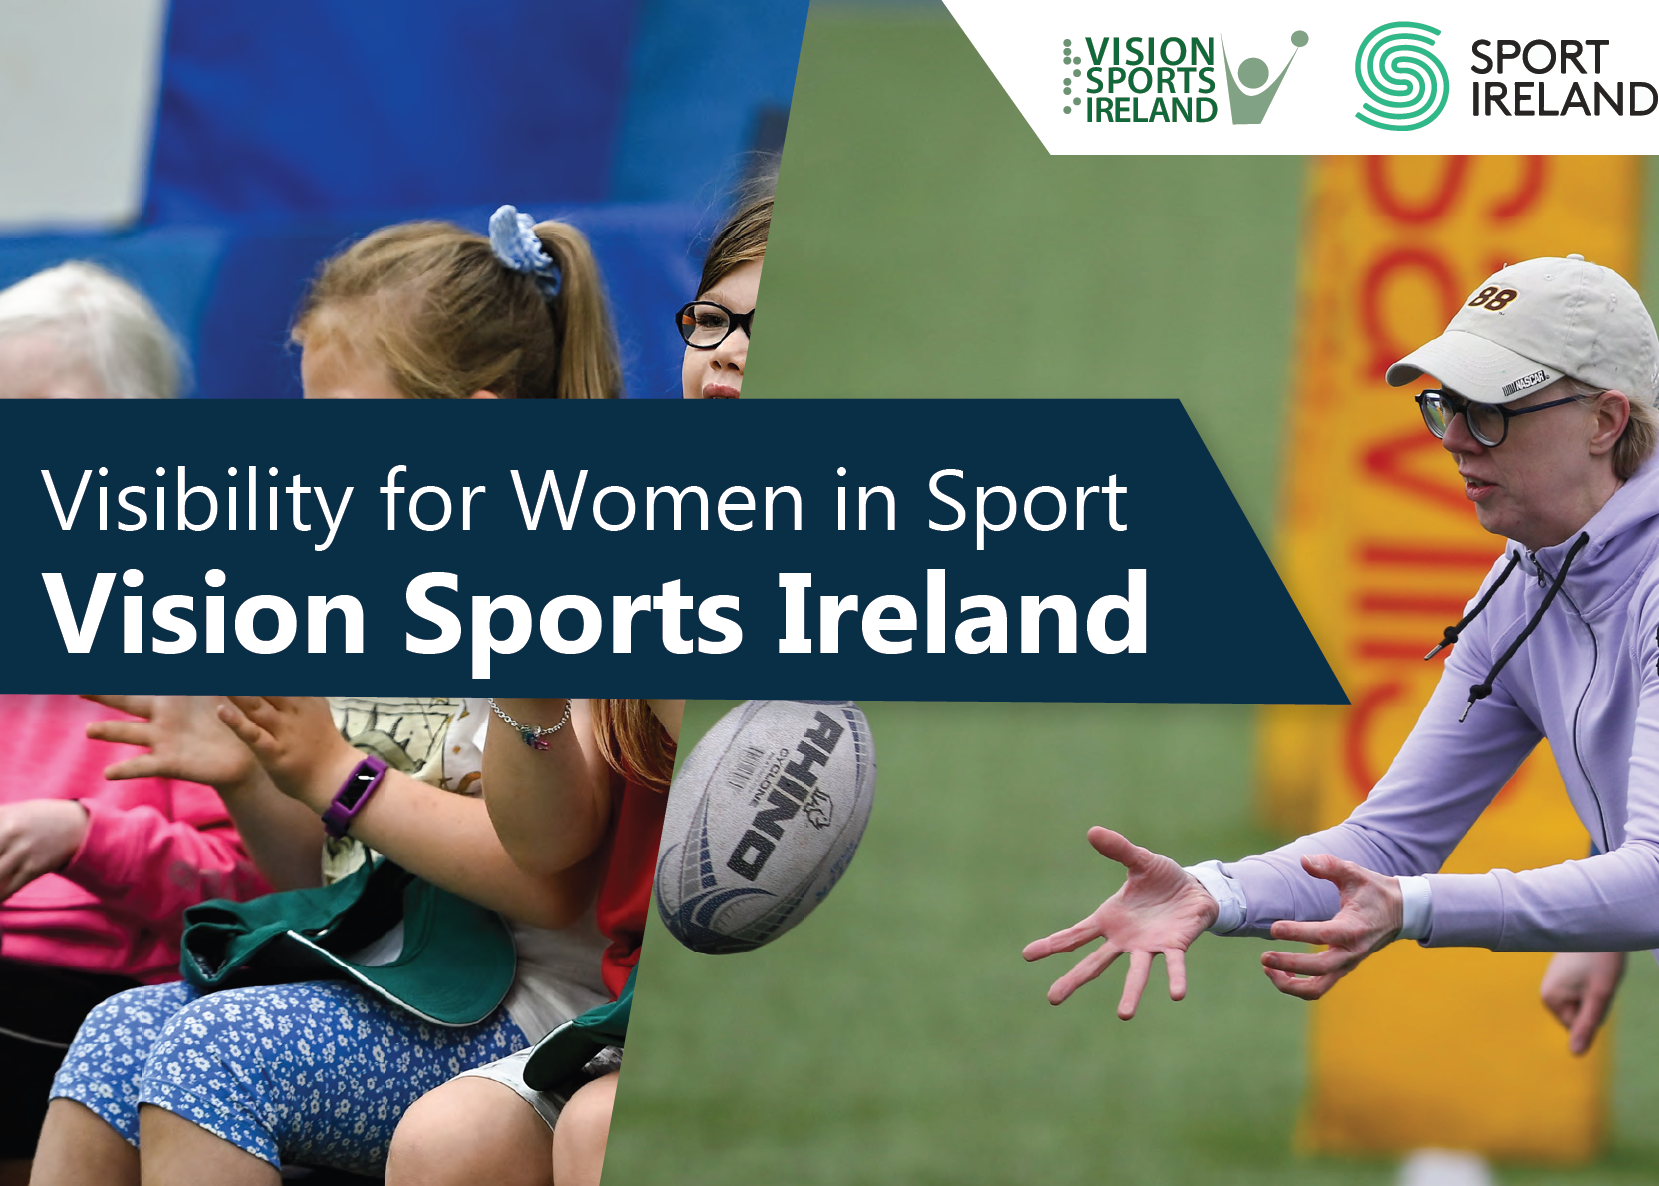 The front cover of the Visibility for Women in Sport research. The background images are of a woman playing rugby and some girls laughing. The text reads "Visibility for Women in Sport. Vision Sports Ireland". The top right hand corner has the Vision Sports Ireland logo and the Sport Ireland logo.